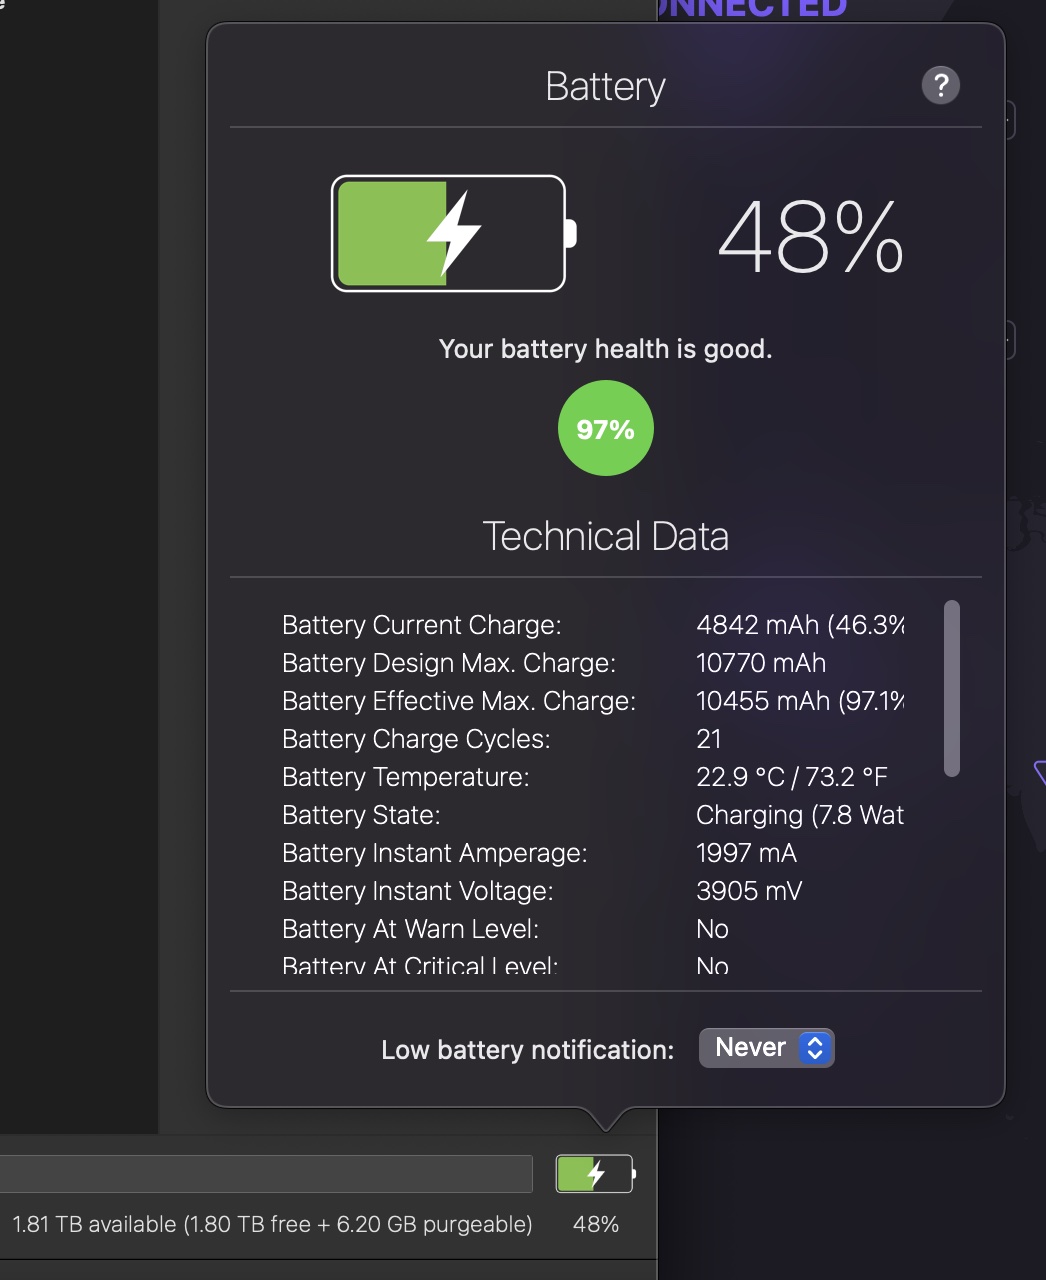 coconutBattery 3.9 - by